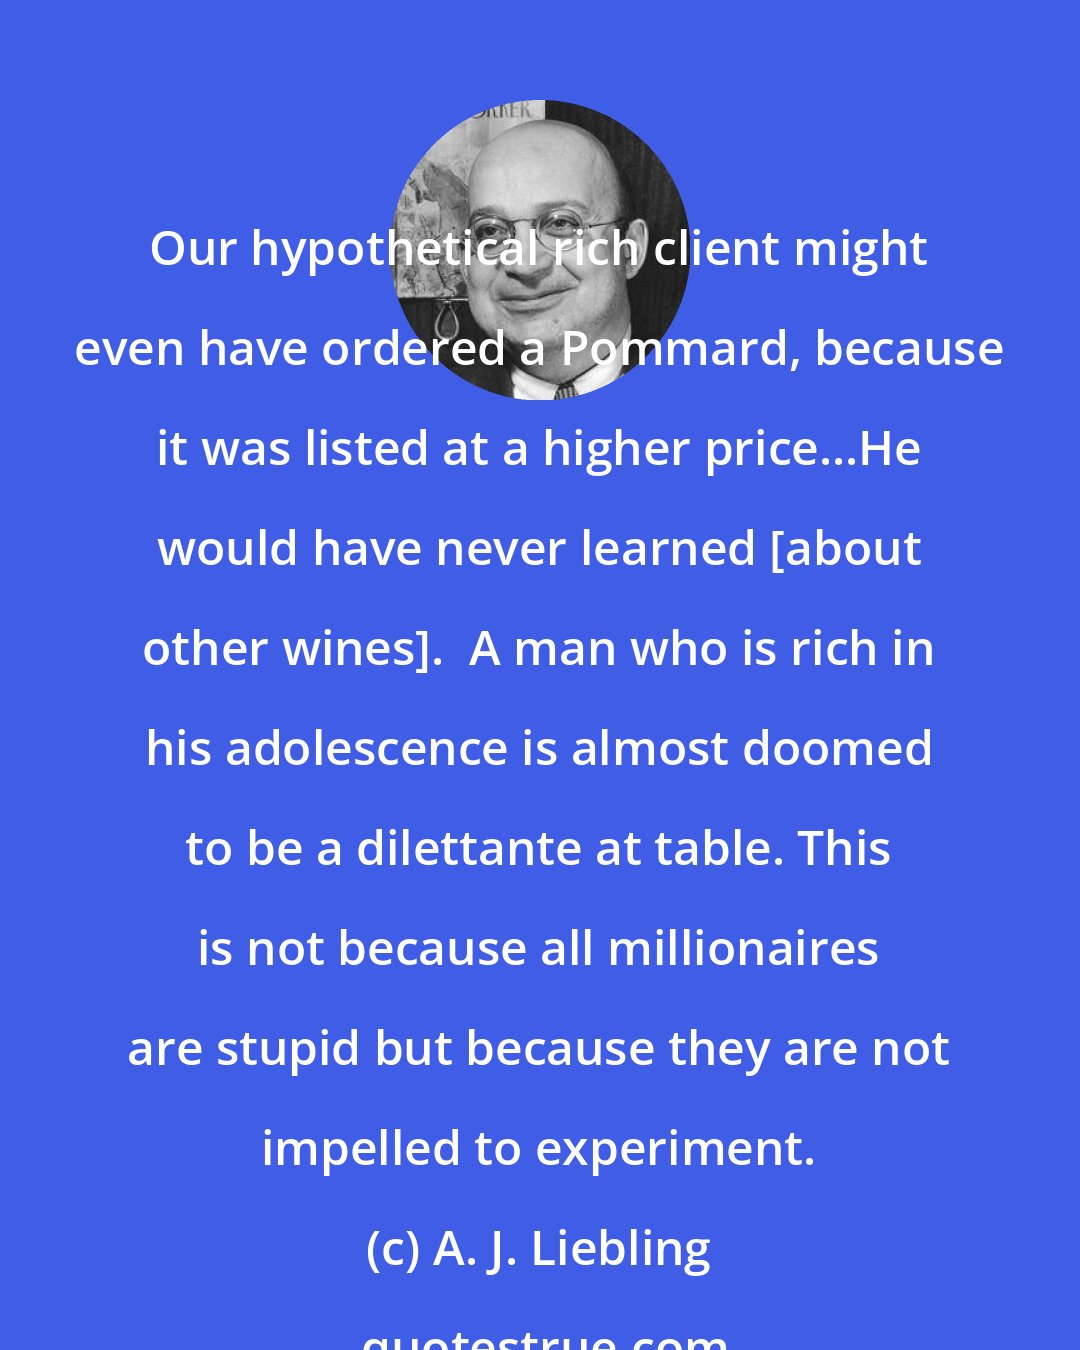 A. J. Liebling: Our hypothetical rich client might even have ordered a Pommard, because it was listed at a higher price...He would have never learned [about other wines].  A man who is rich in his adolescence is almost doomed to be a dilettante at table. This is not because all millionaires are stupid but because they are not impelled to experiment.